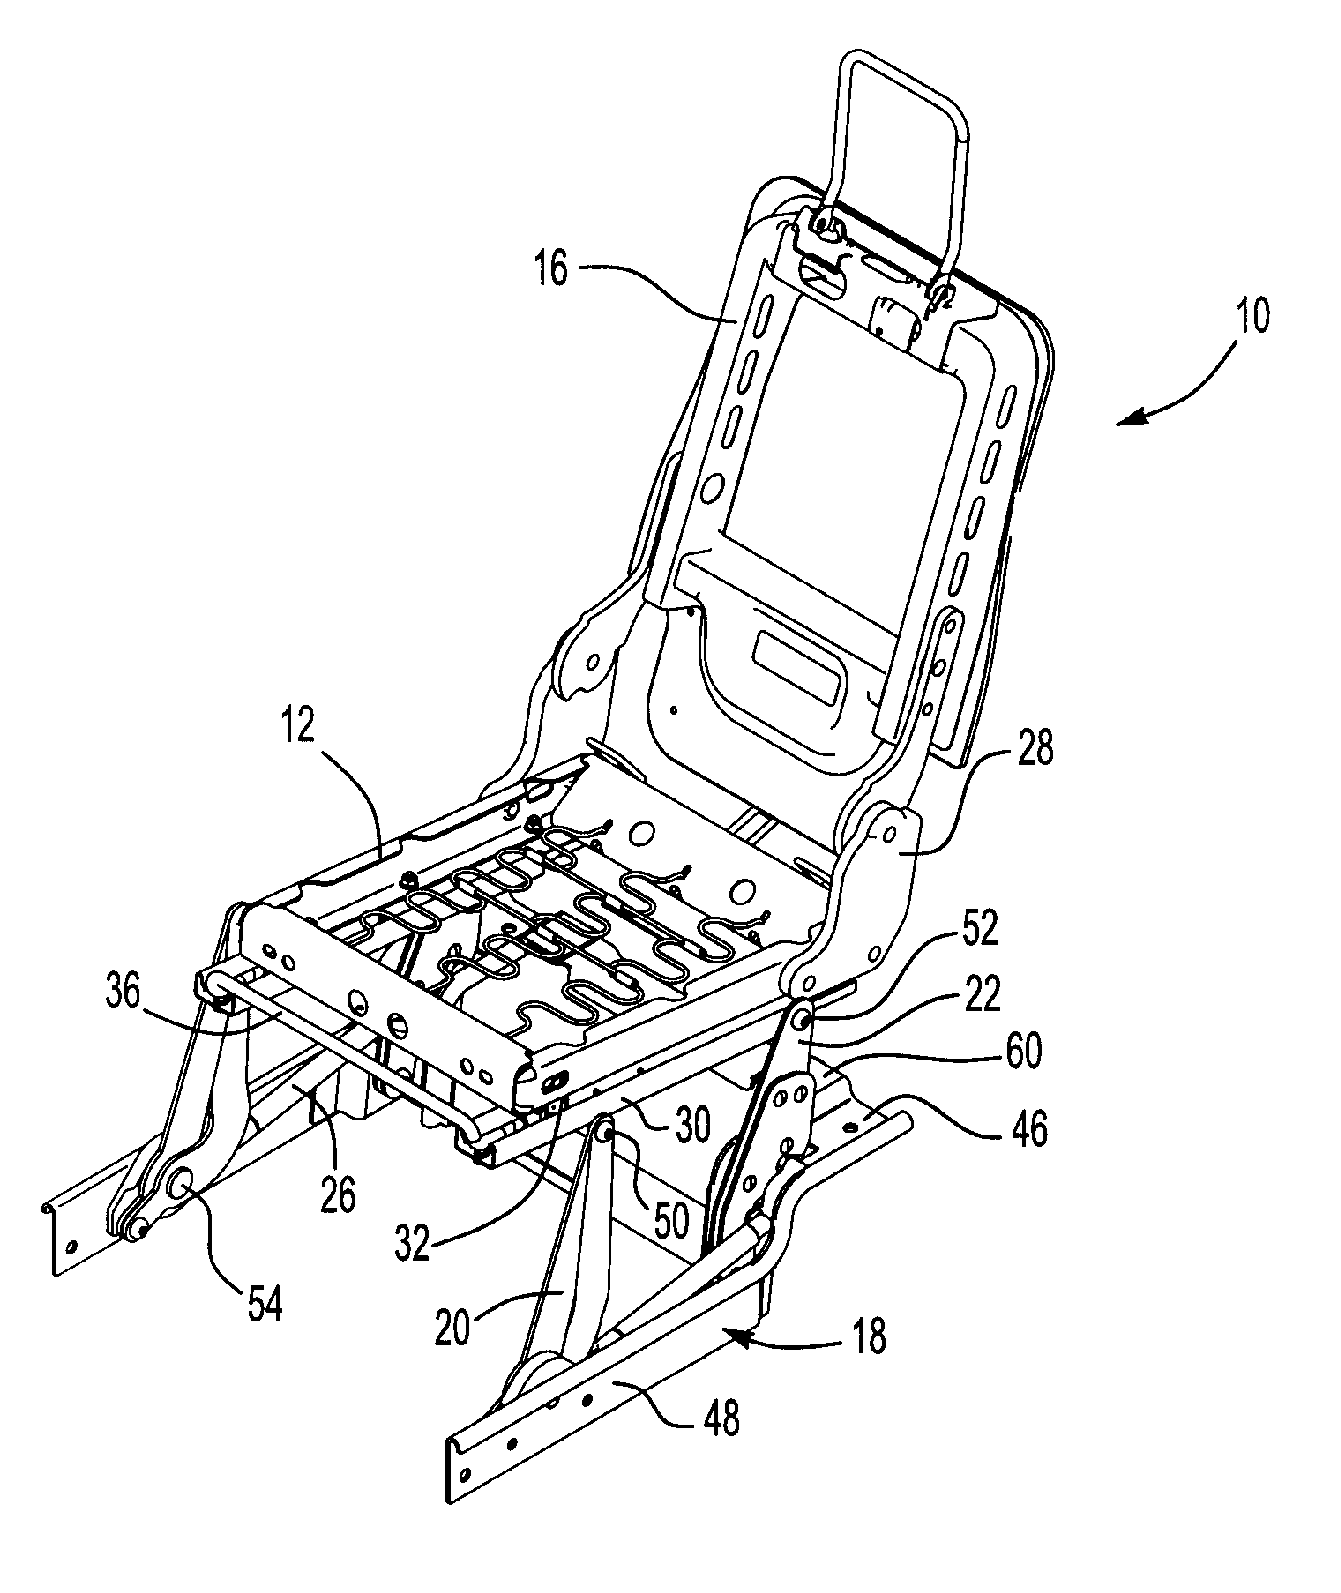 Vehicle seat that tips and kneels and folds into a stowage well